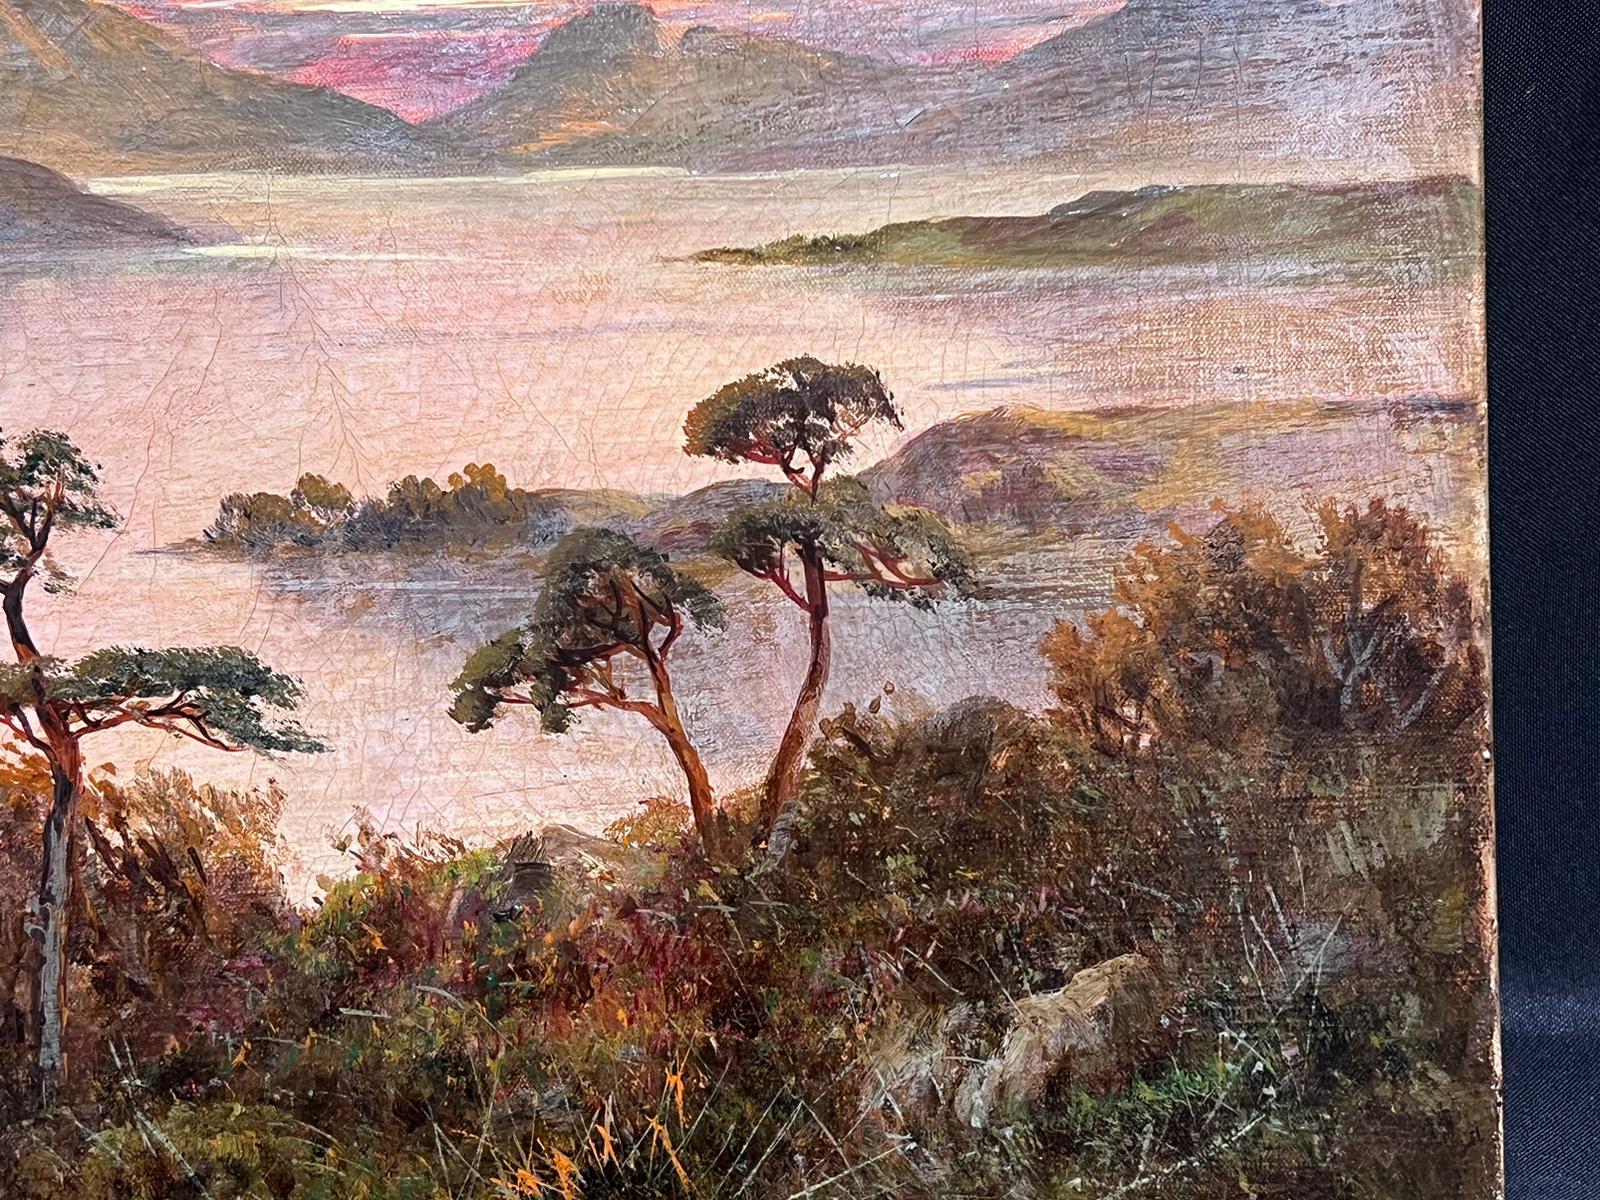 The Highland Loch
signed by F. E. Jamieson (British 1895-1950)
indistinctly titled verso, most likely a loch in the Trossochs region of Argyll. 
oil painting on canvas, unframed
canvas : 16 x 24 inches
provenance: private collection, UK
condition: